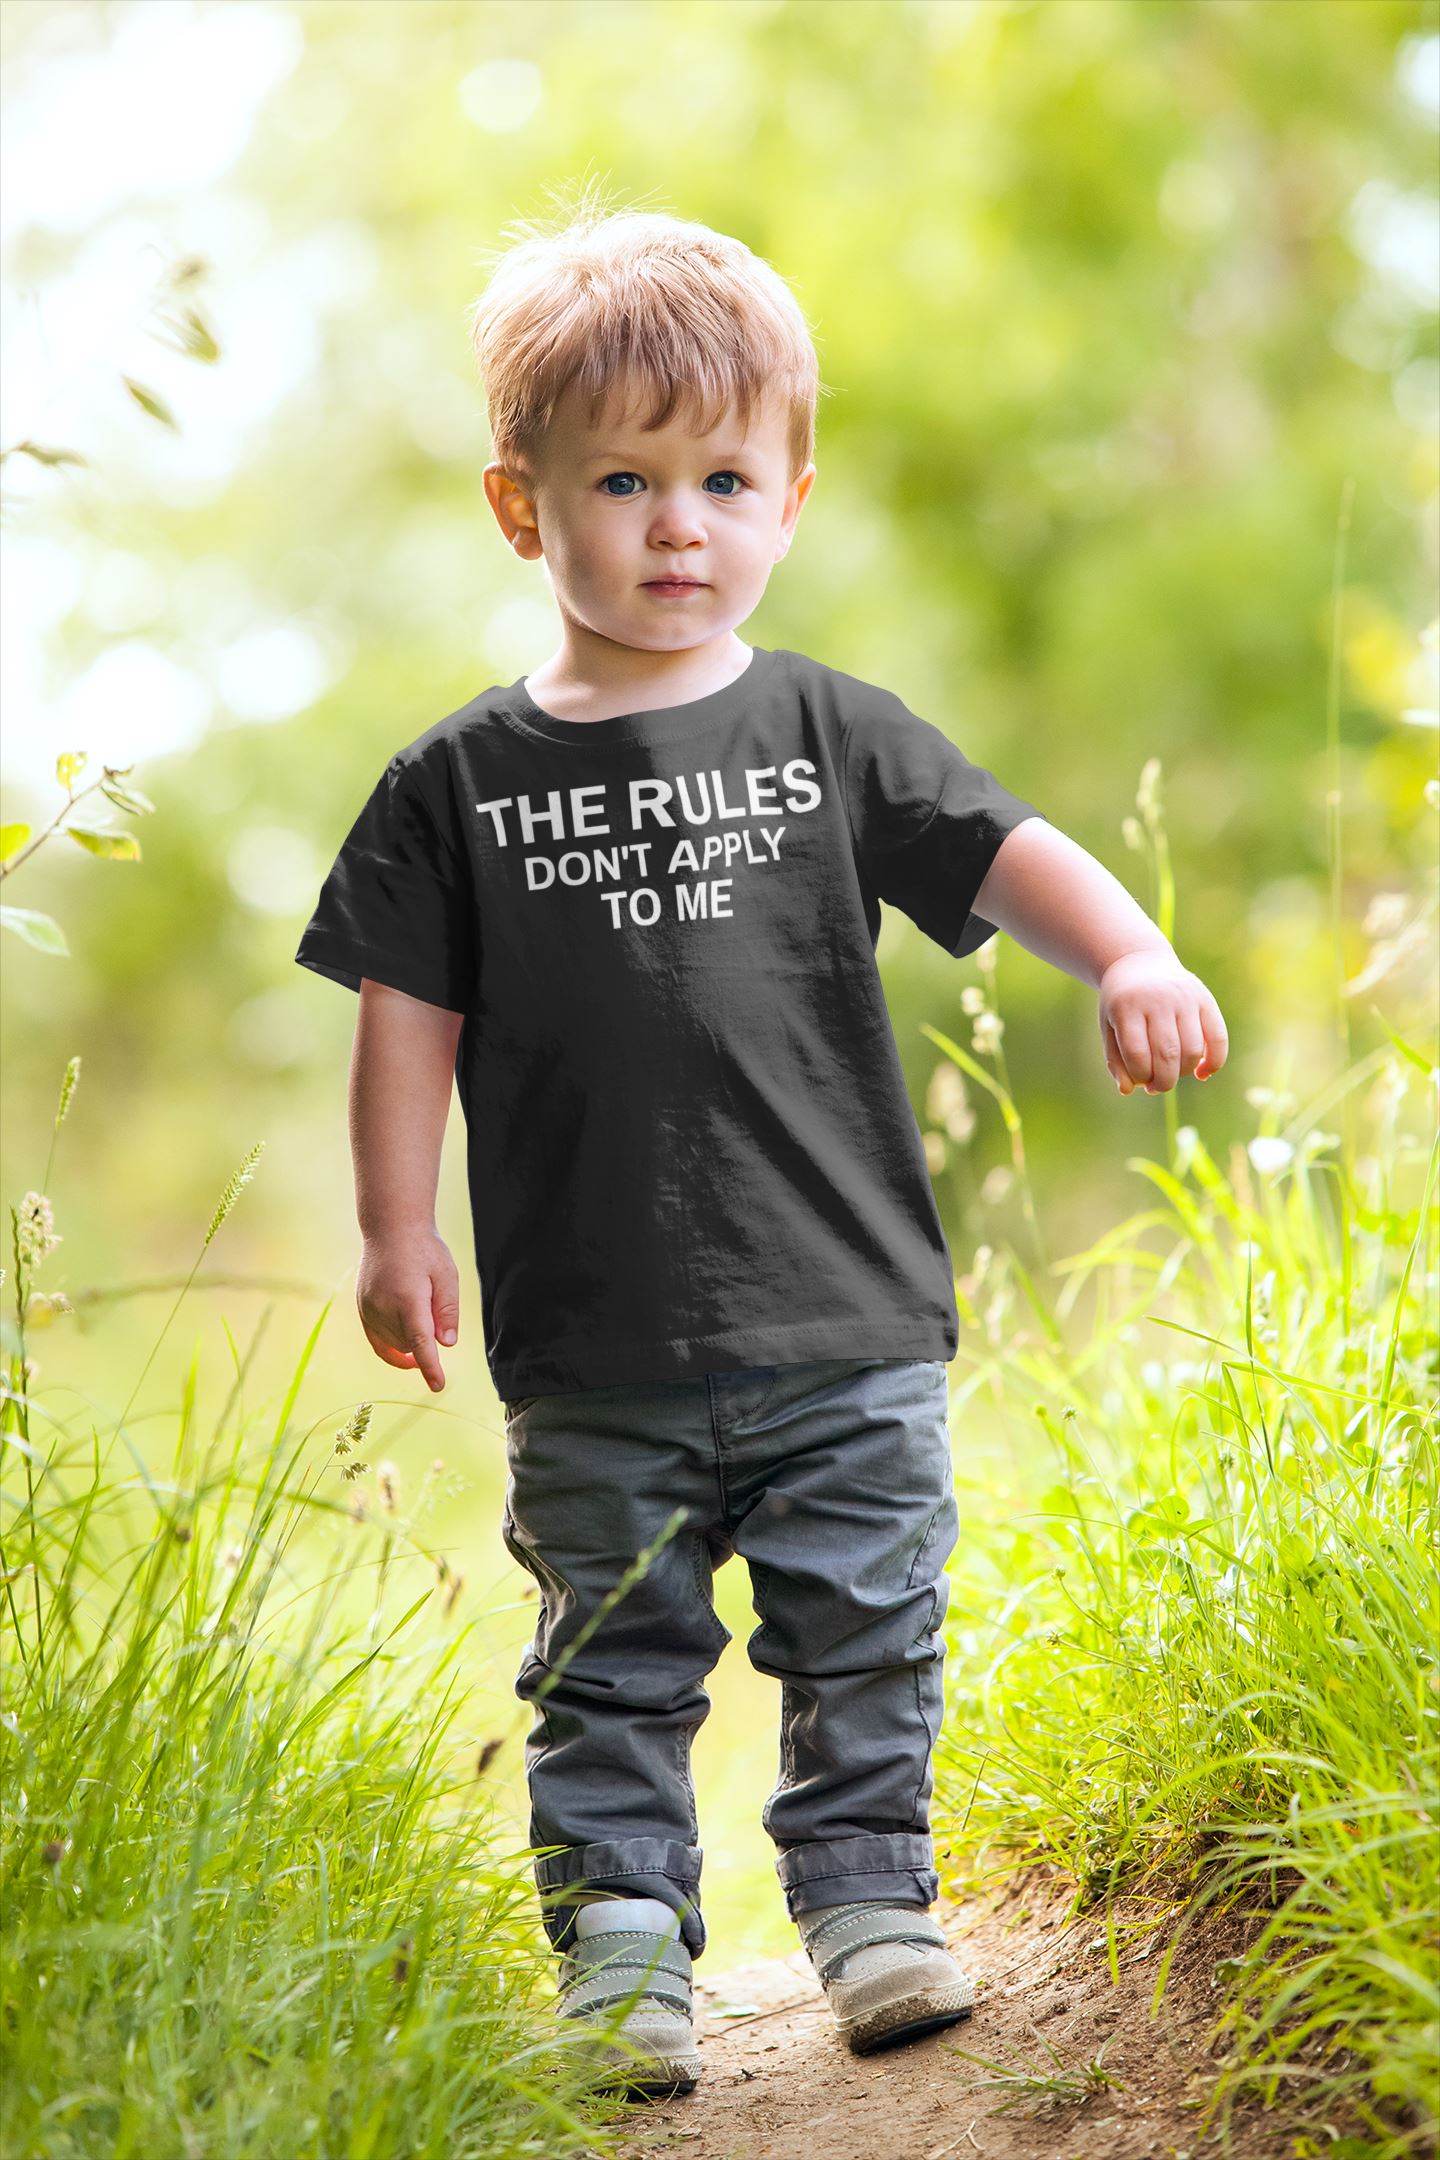 The Rules Don't Apply to Me Exclusive Family T Shirt for Baby Boy and Girl freeshipping - Catch My Drift India